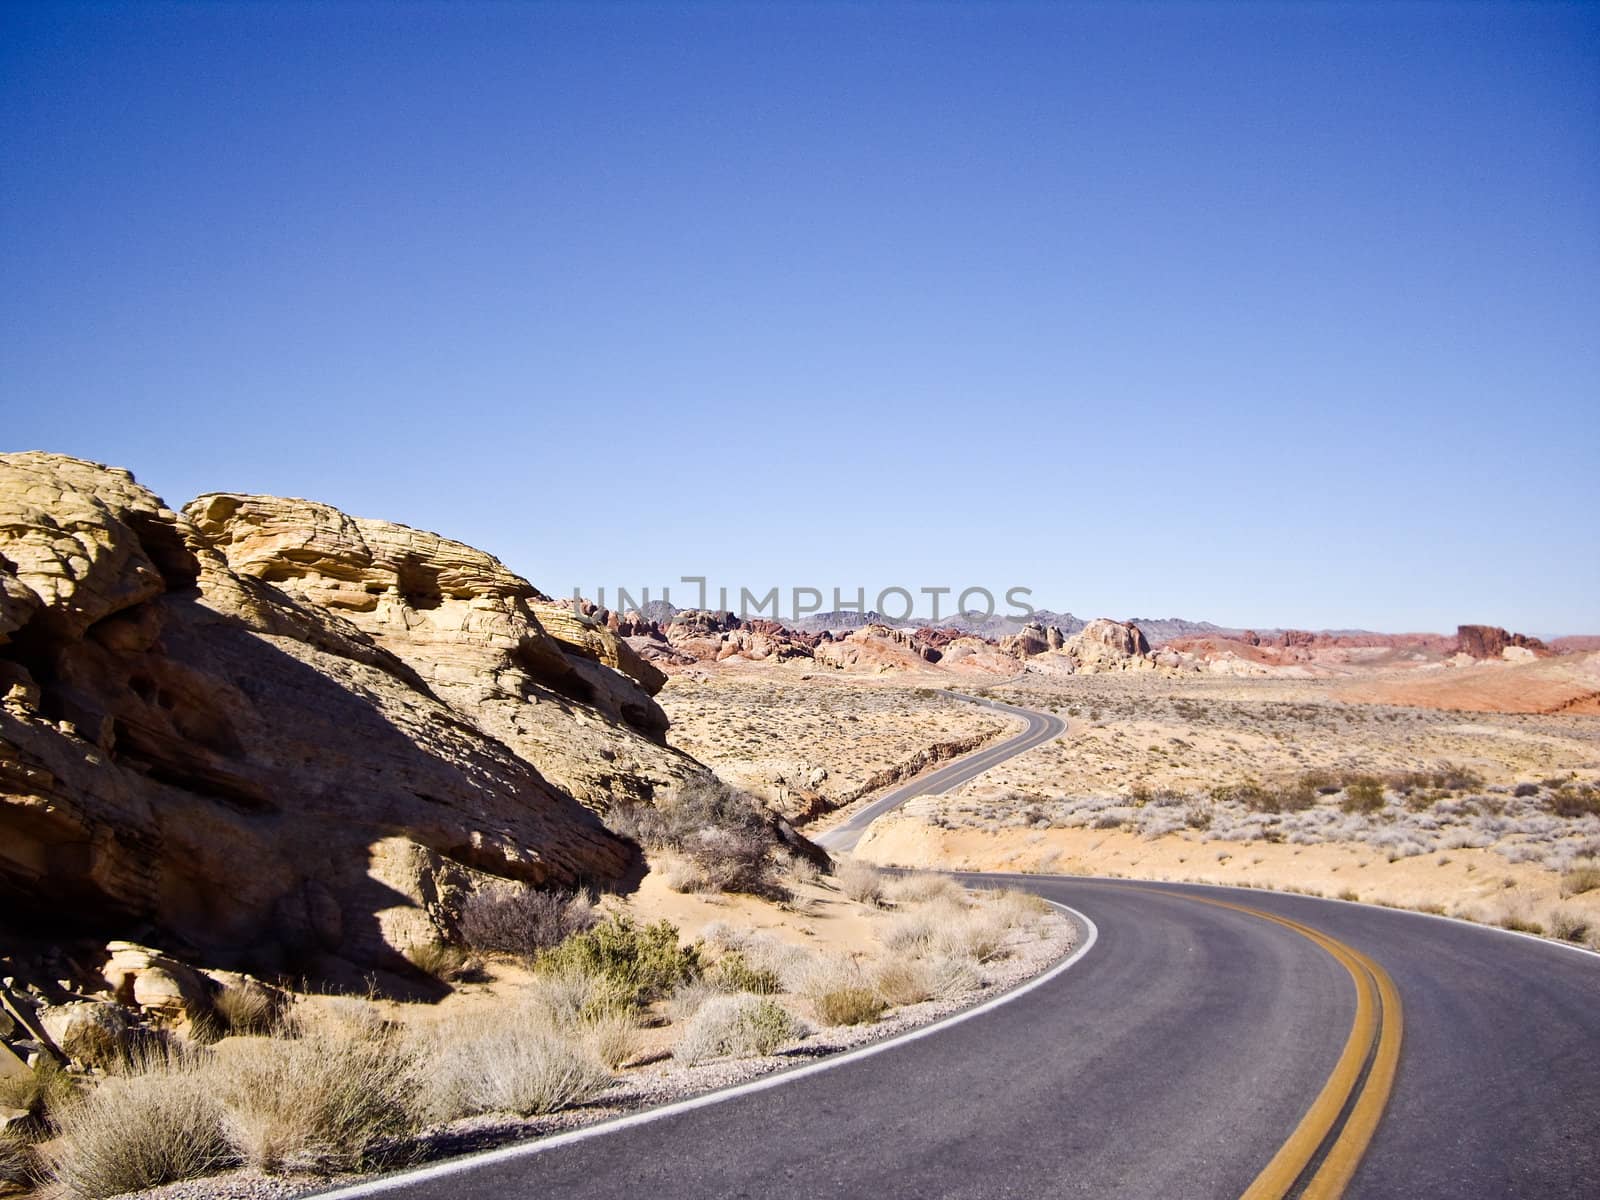 Long and winding desert road curves into the distance